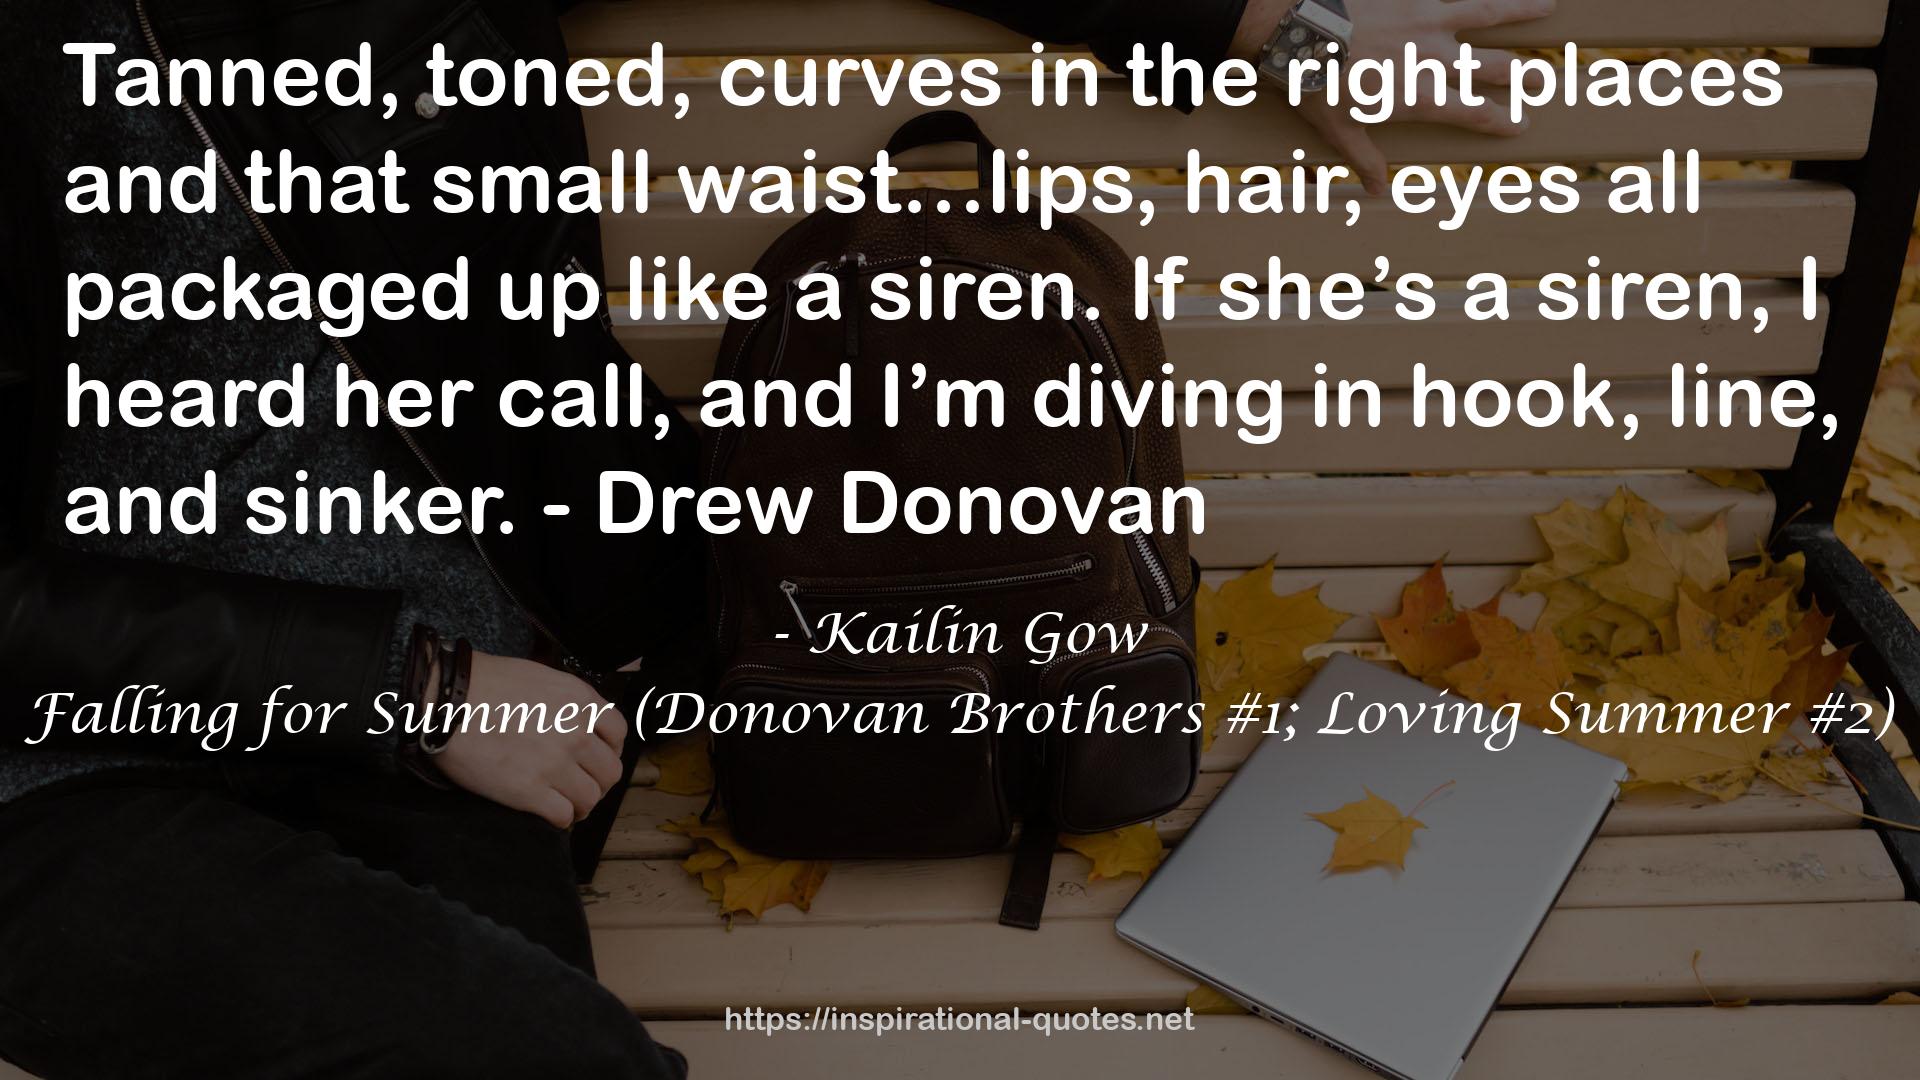 Falling for Summer (Donovan Brothers #1; Loving Summer #2) QUOTES